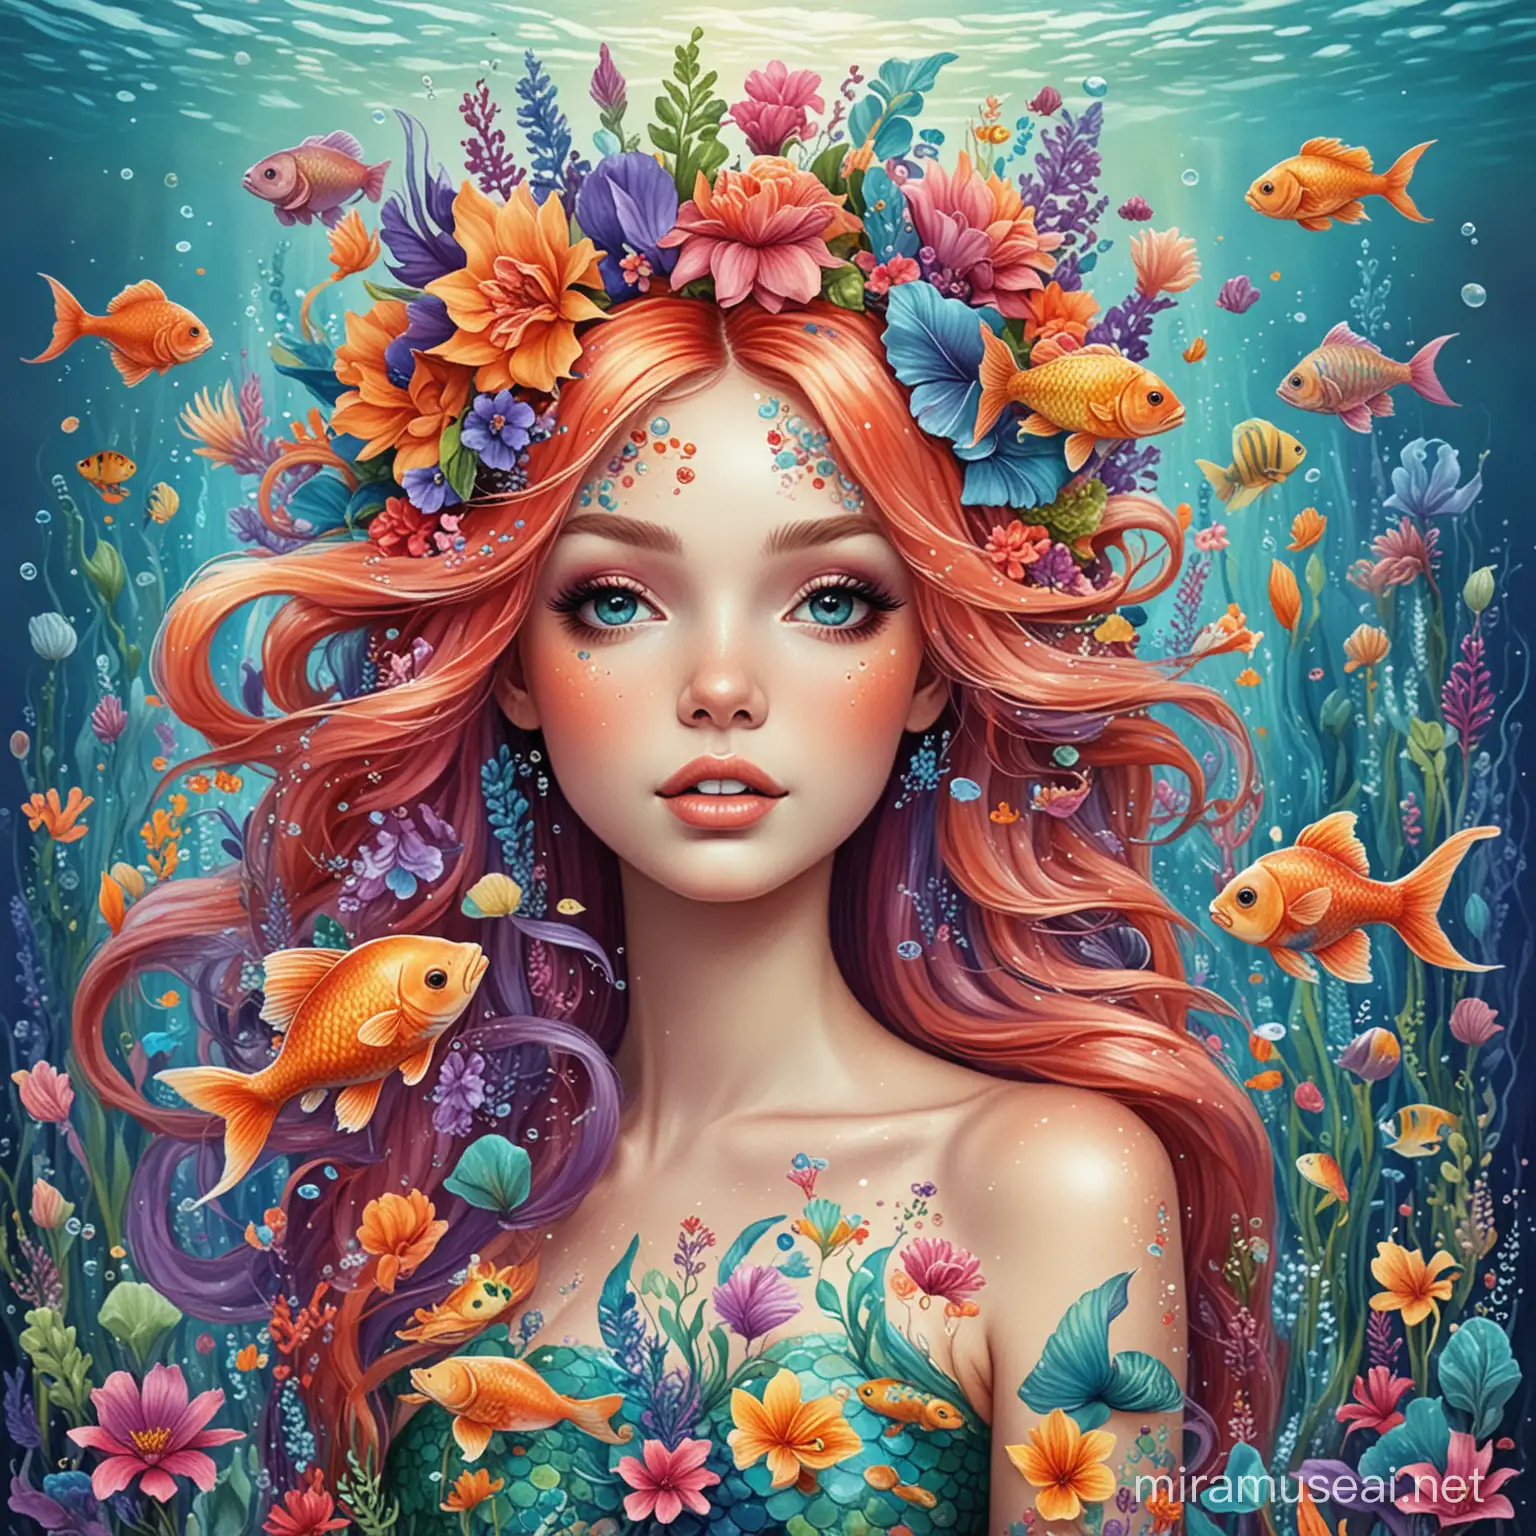 Whimsical Mermaid Surrounded by Vibrant Fish and Floral Adornments